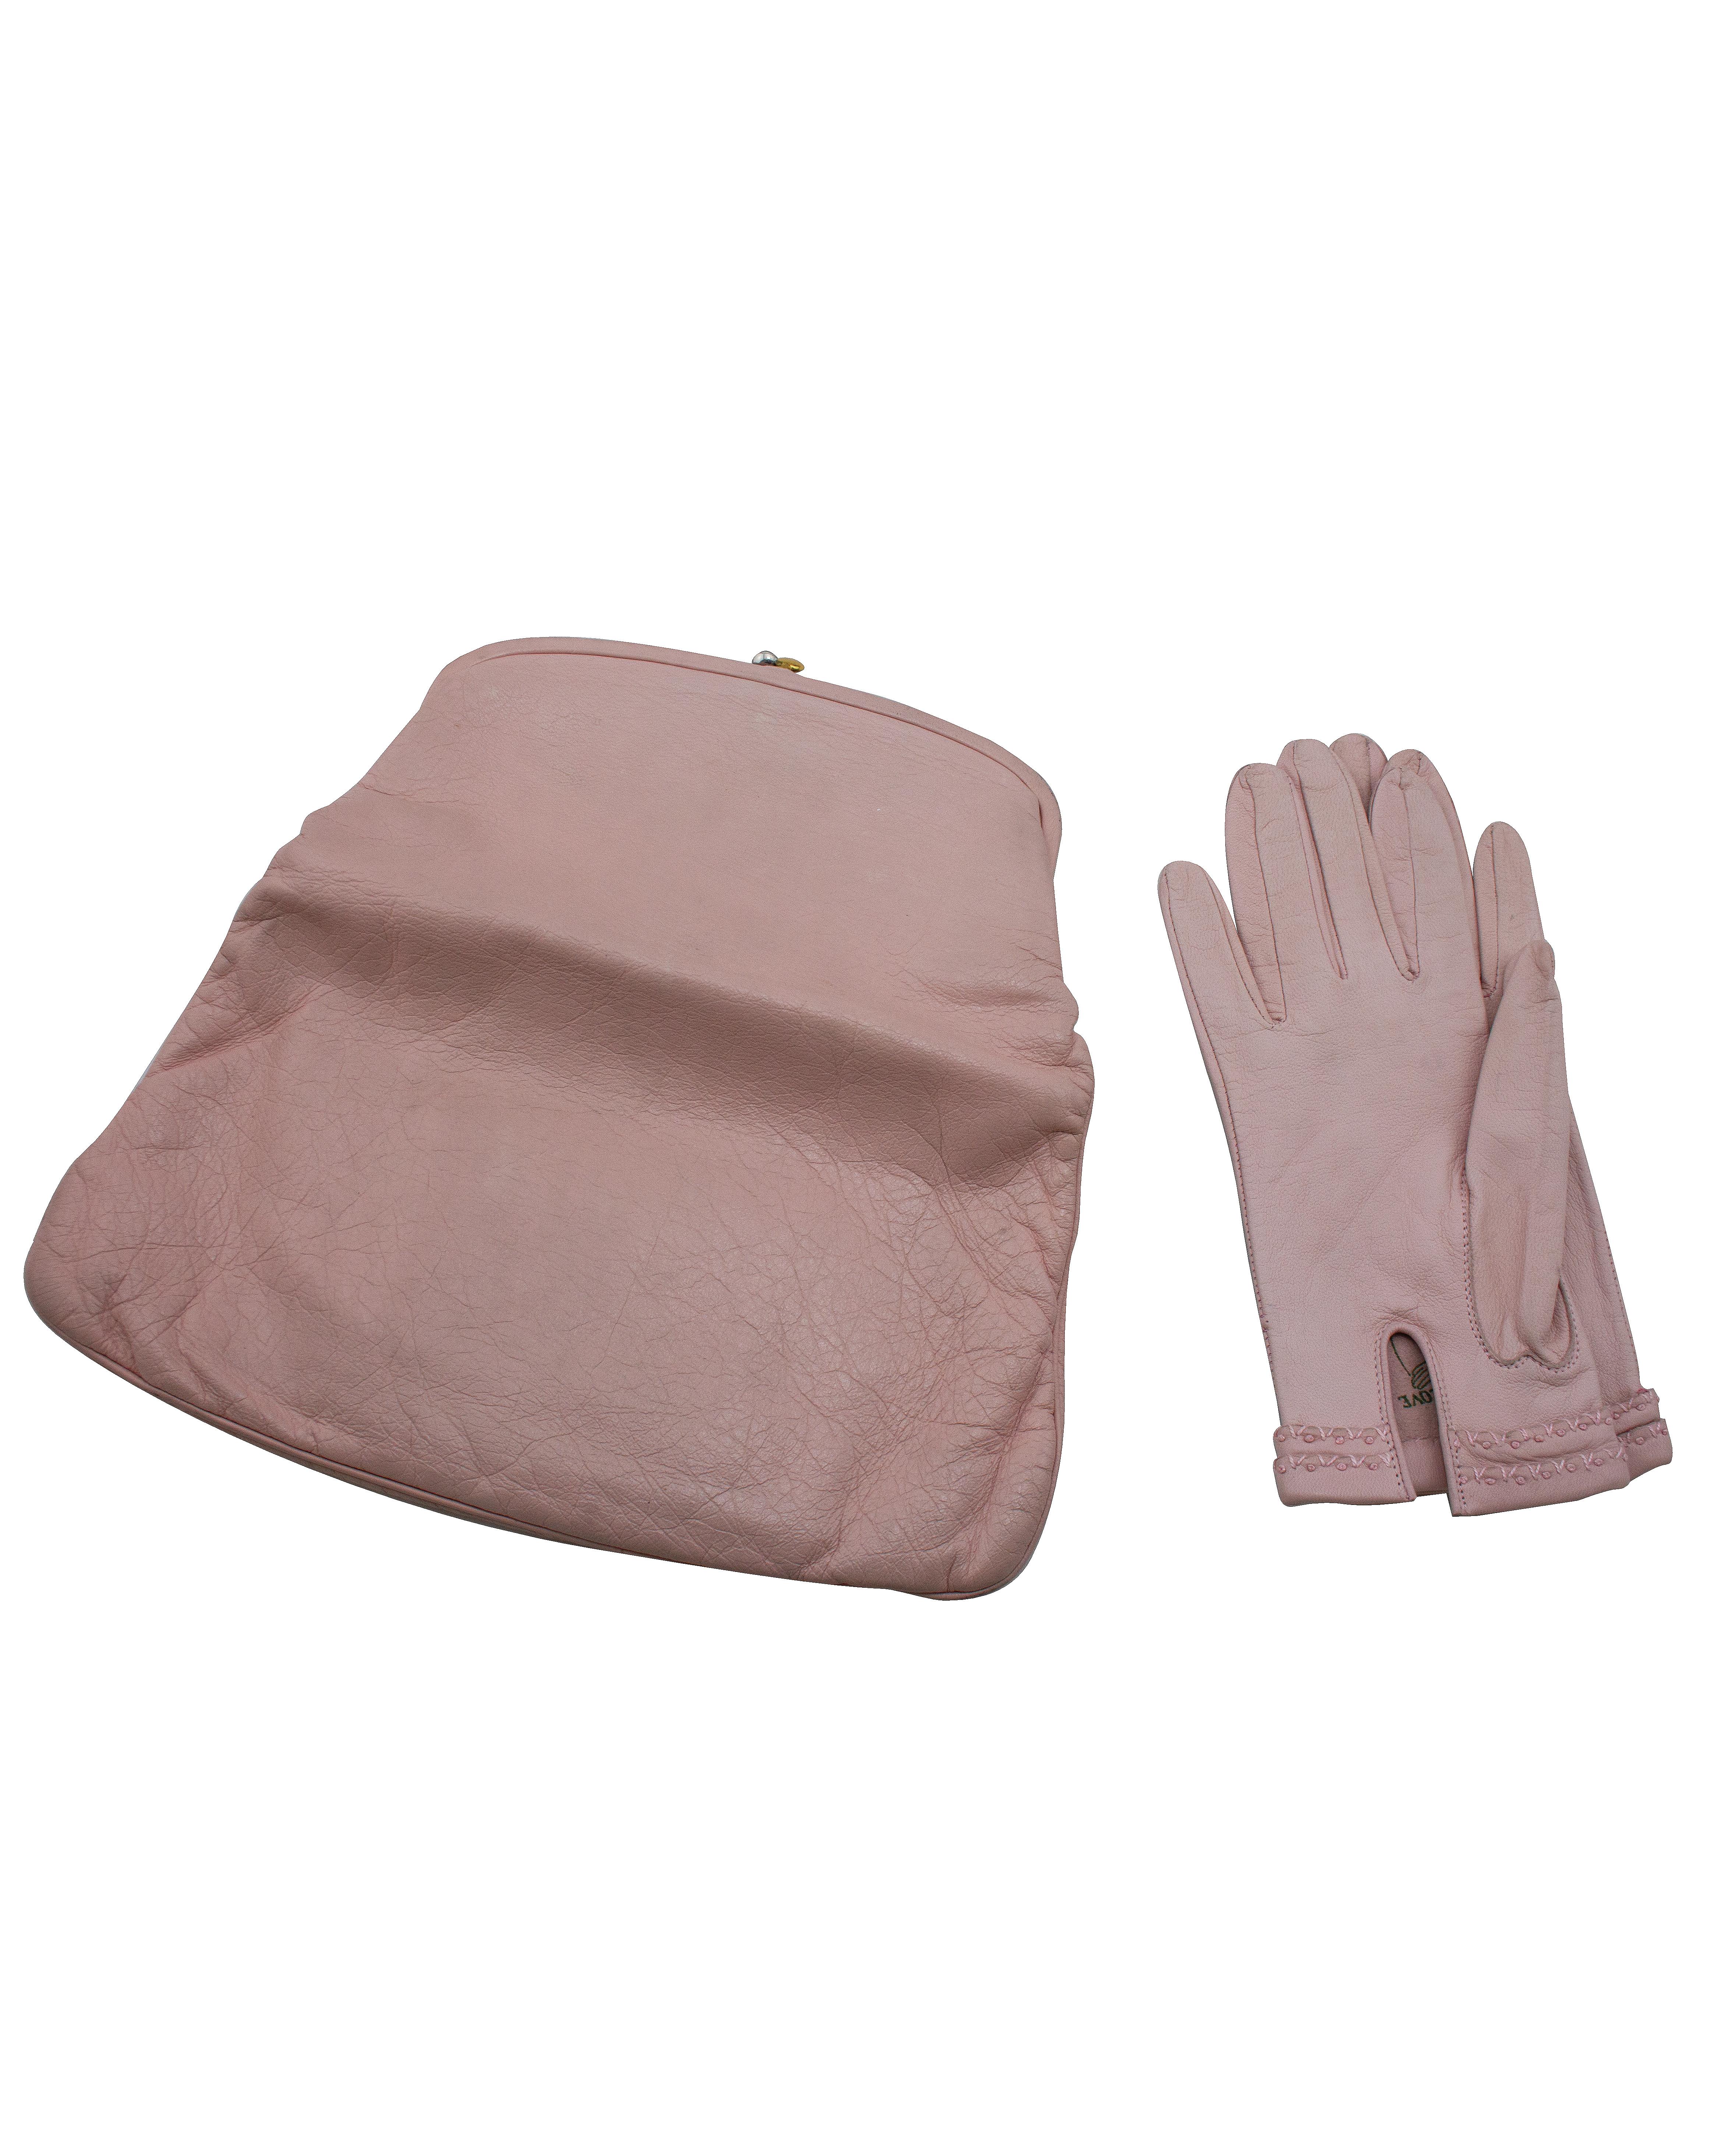 1950's pastel pink kid leather classic Coblentz fold over clutch with matching pink leather gloves. Rarely found in leather this classic shape is lined in navy corded silk and closes with a gilt metal hard frame kiss lock. The added feature of